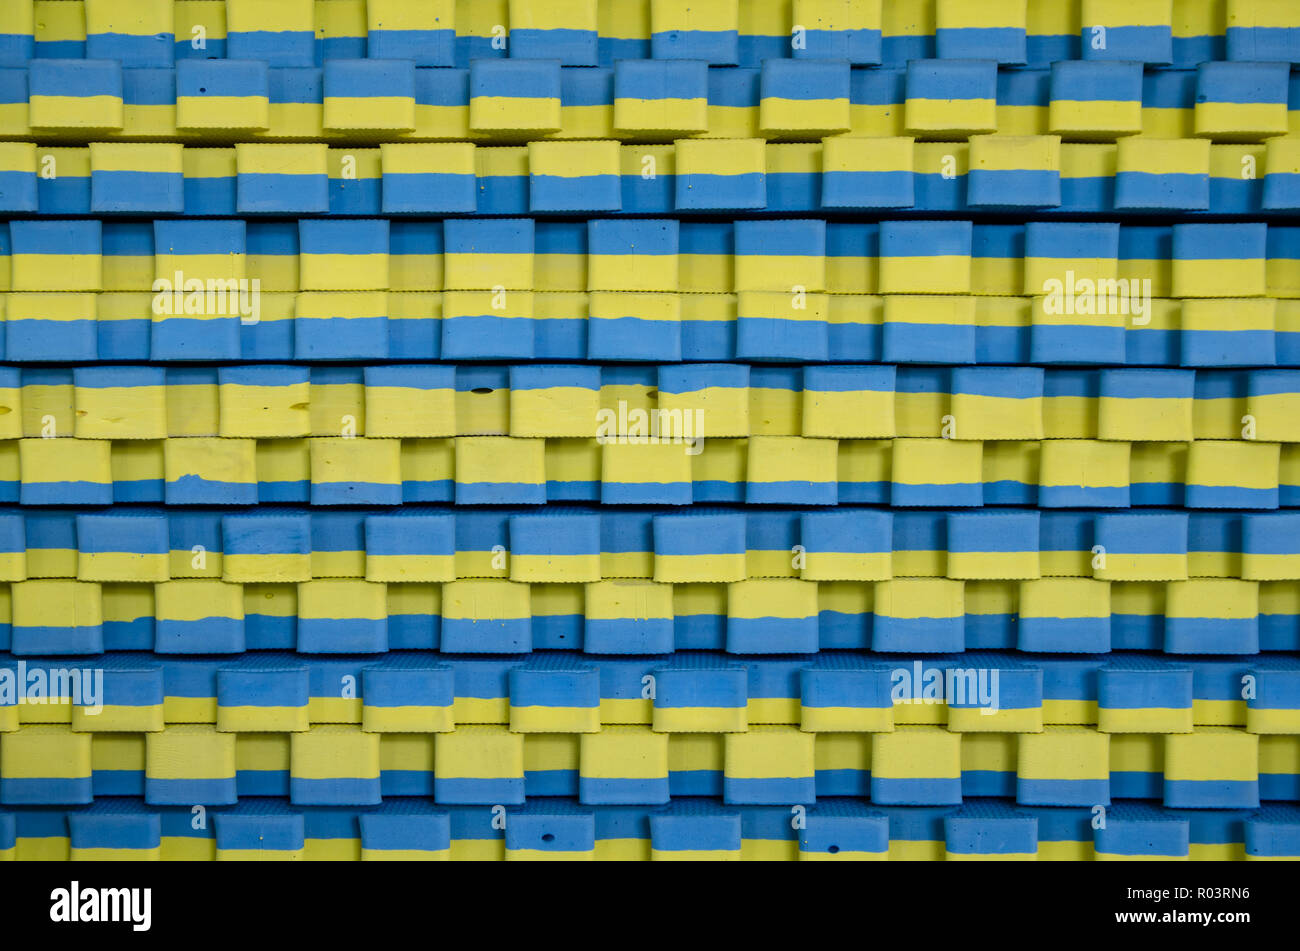 blue-yellow sports mats stacked in large stack Stock Photo